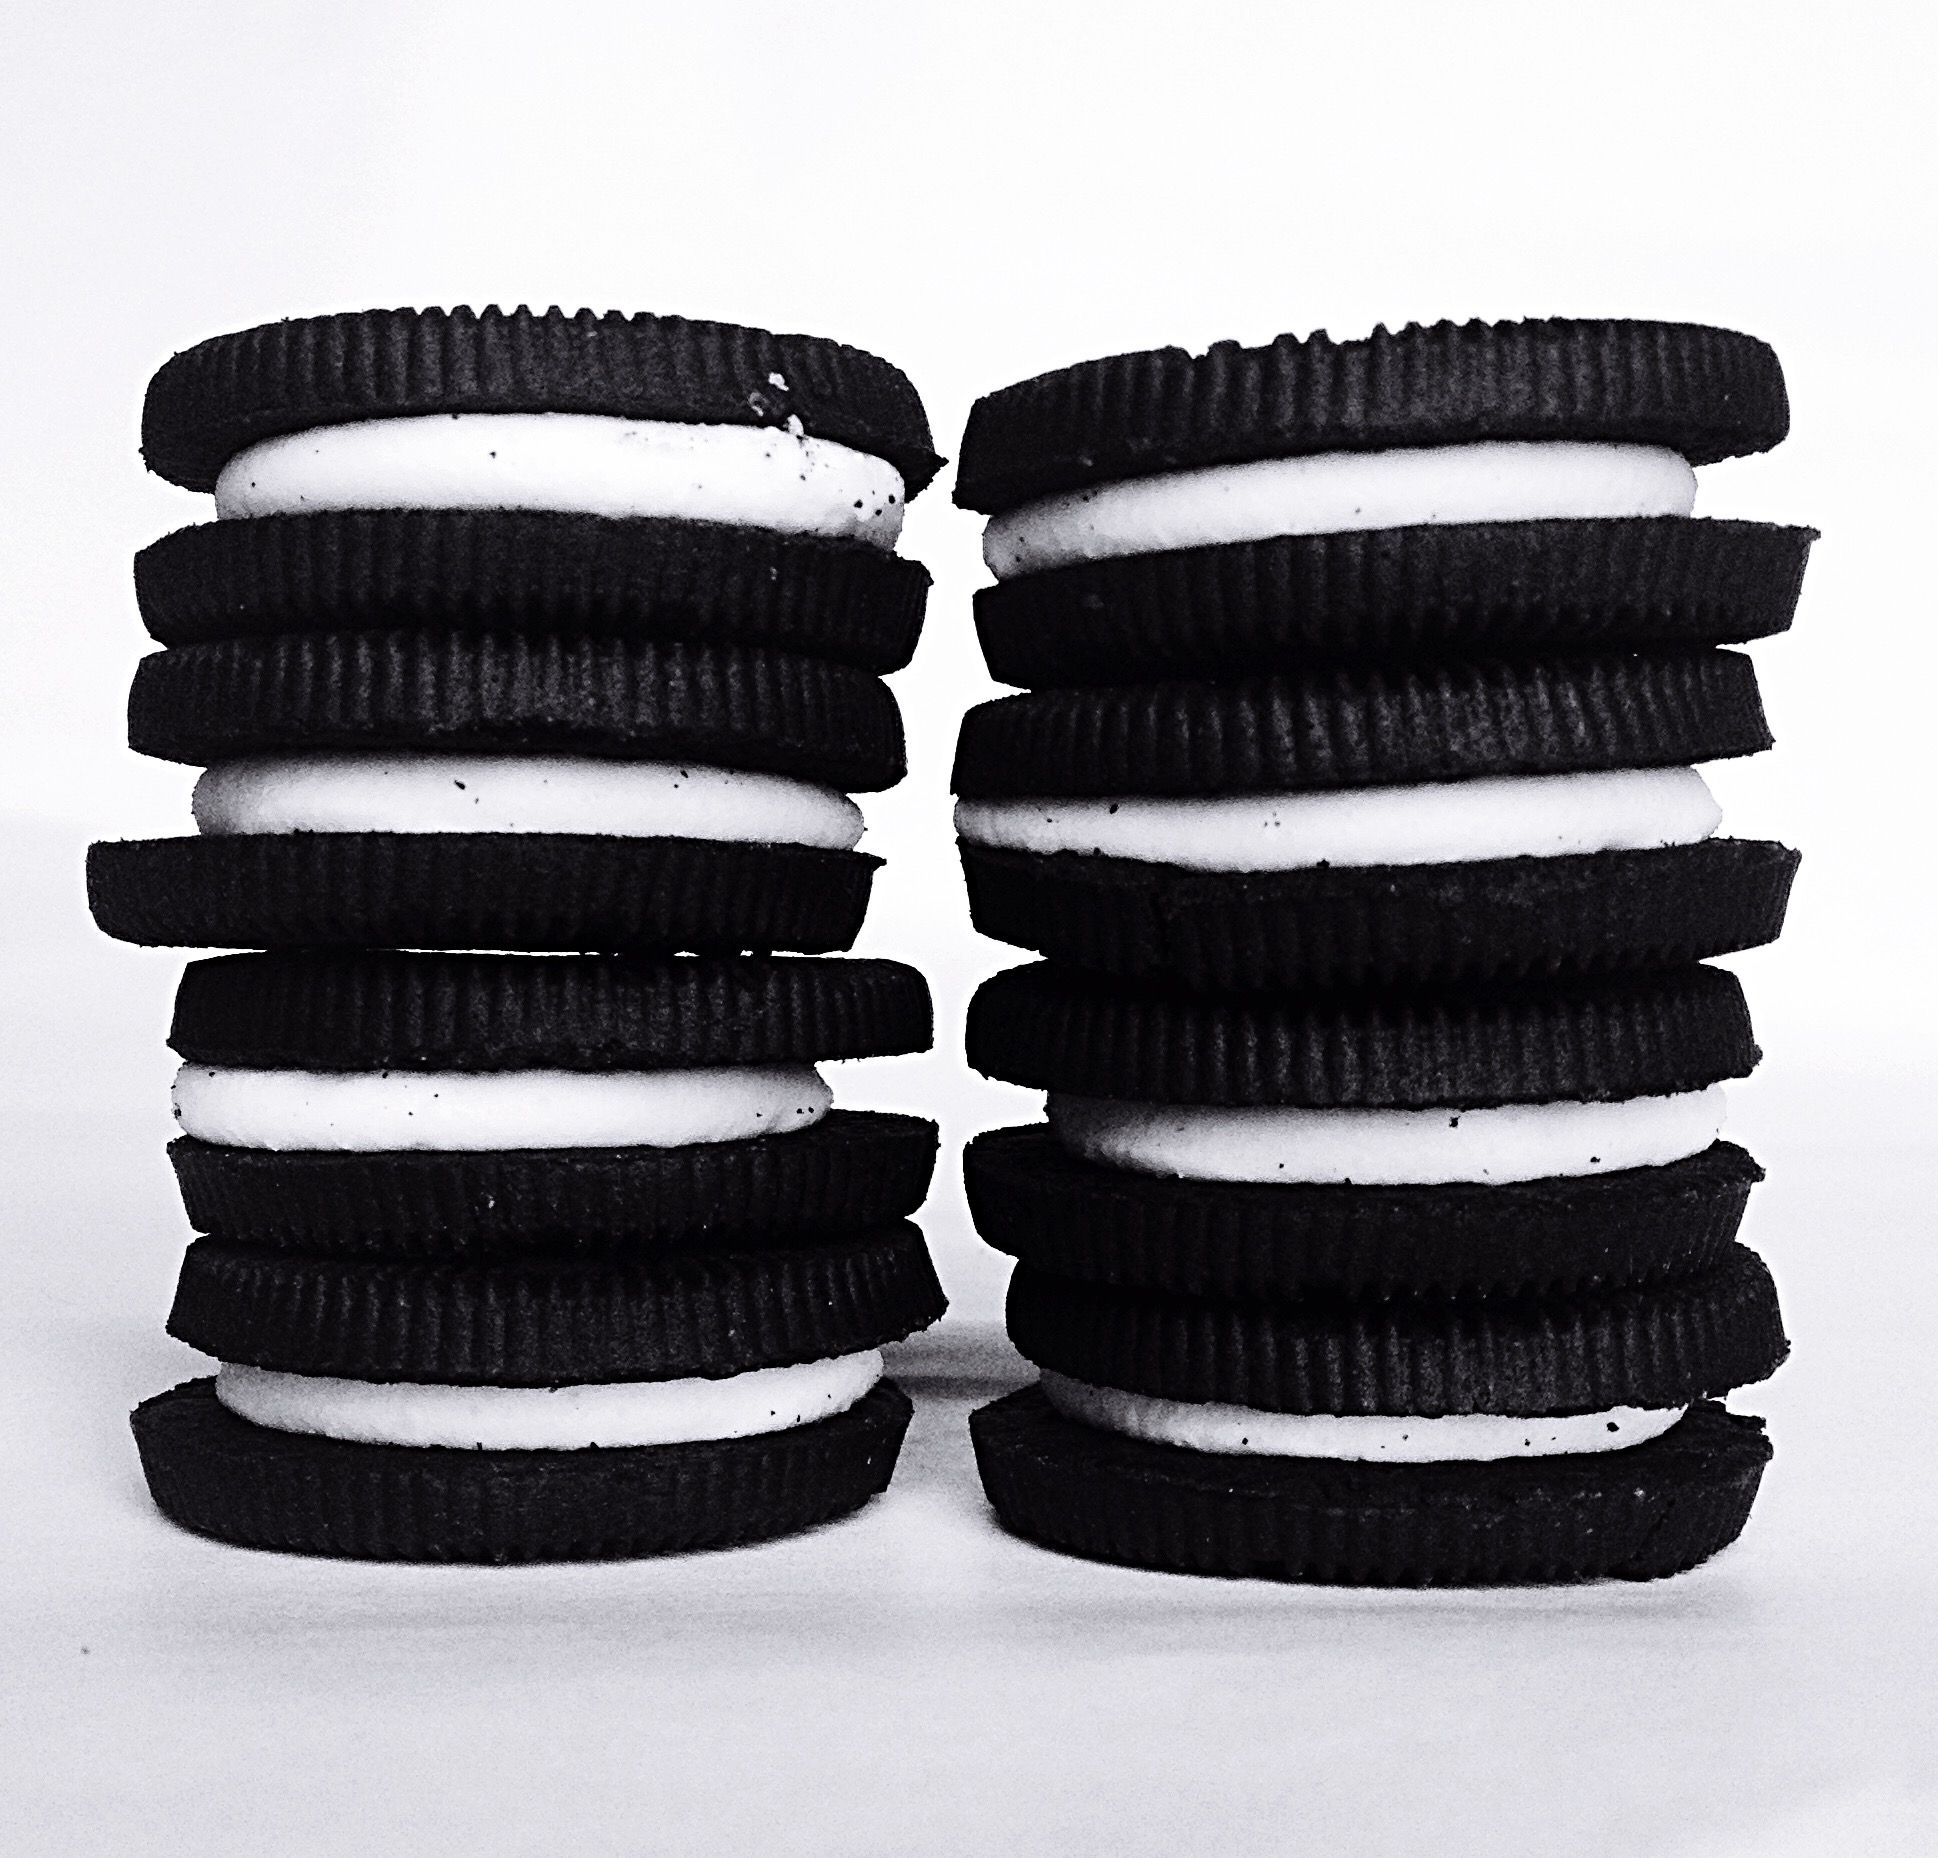 Tire, Black, Automotive tire, Cookie, Cookies and crackers, Auto part, Automotive wheel system, Synthetic rubber, Oreo, Snack, 